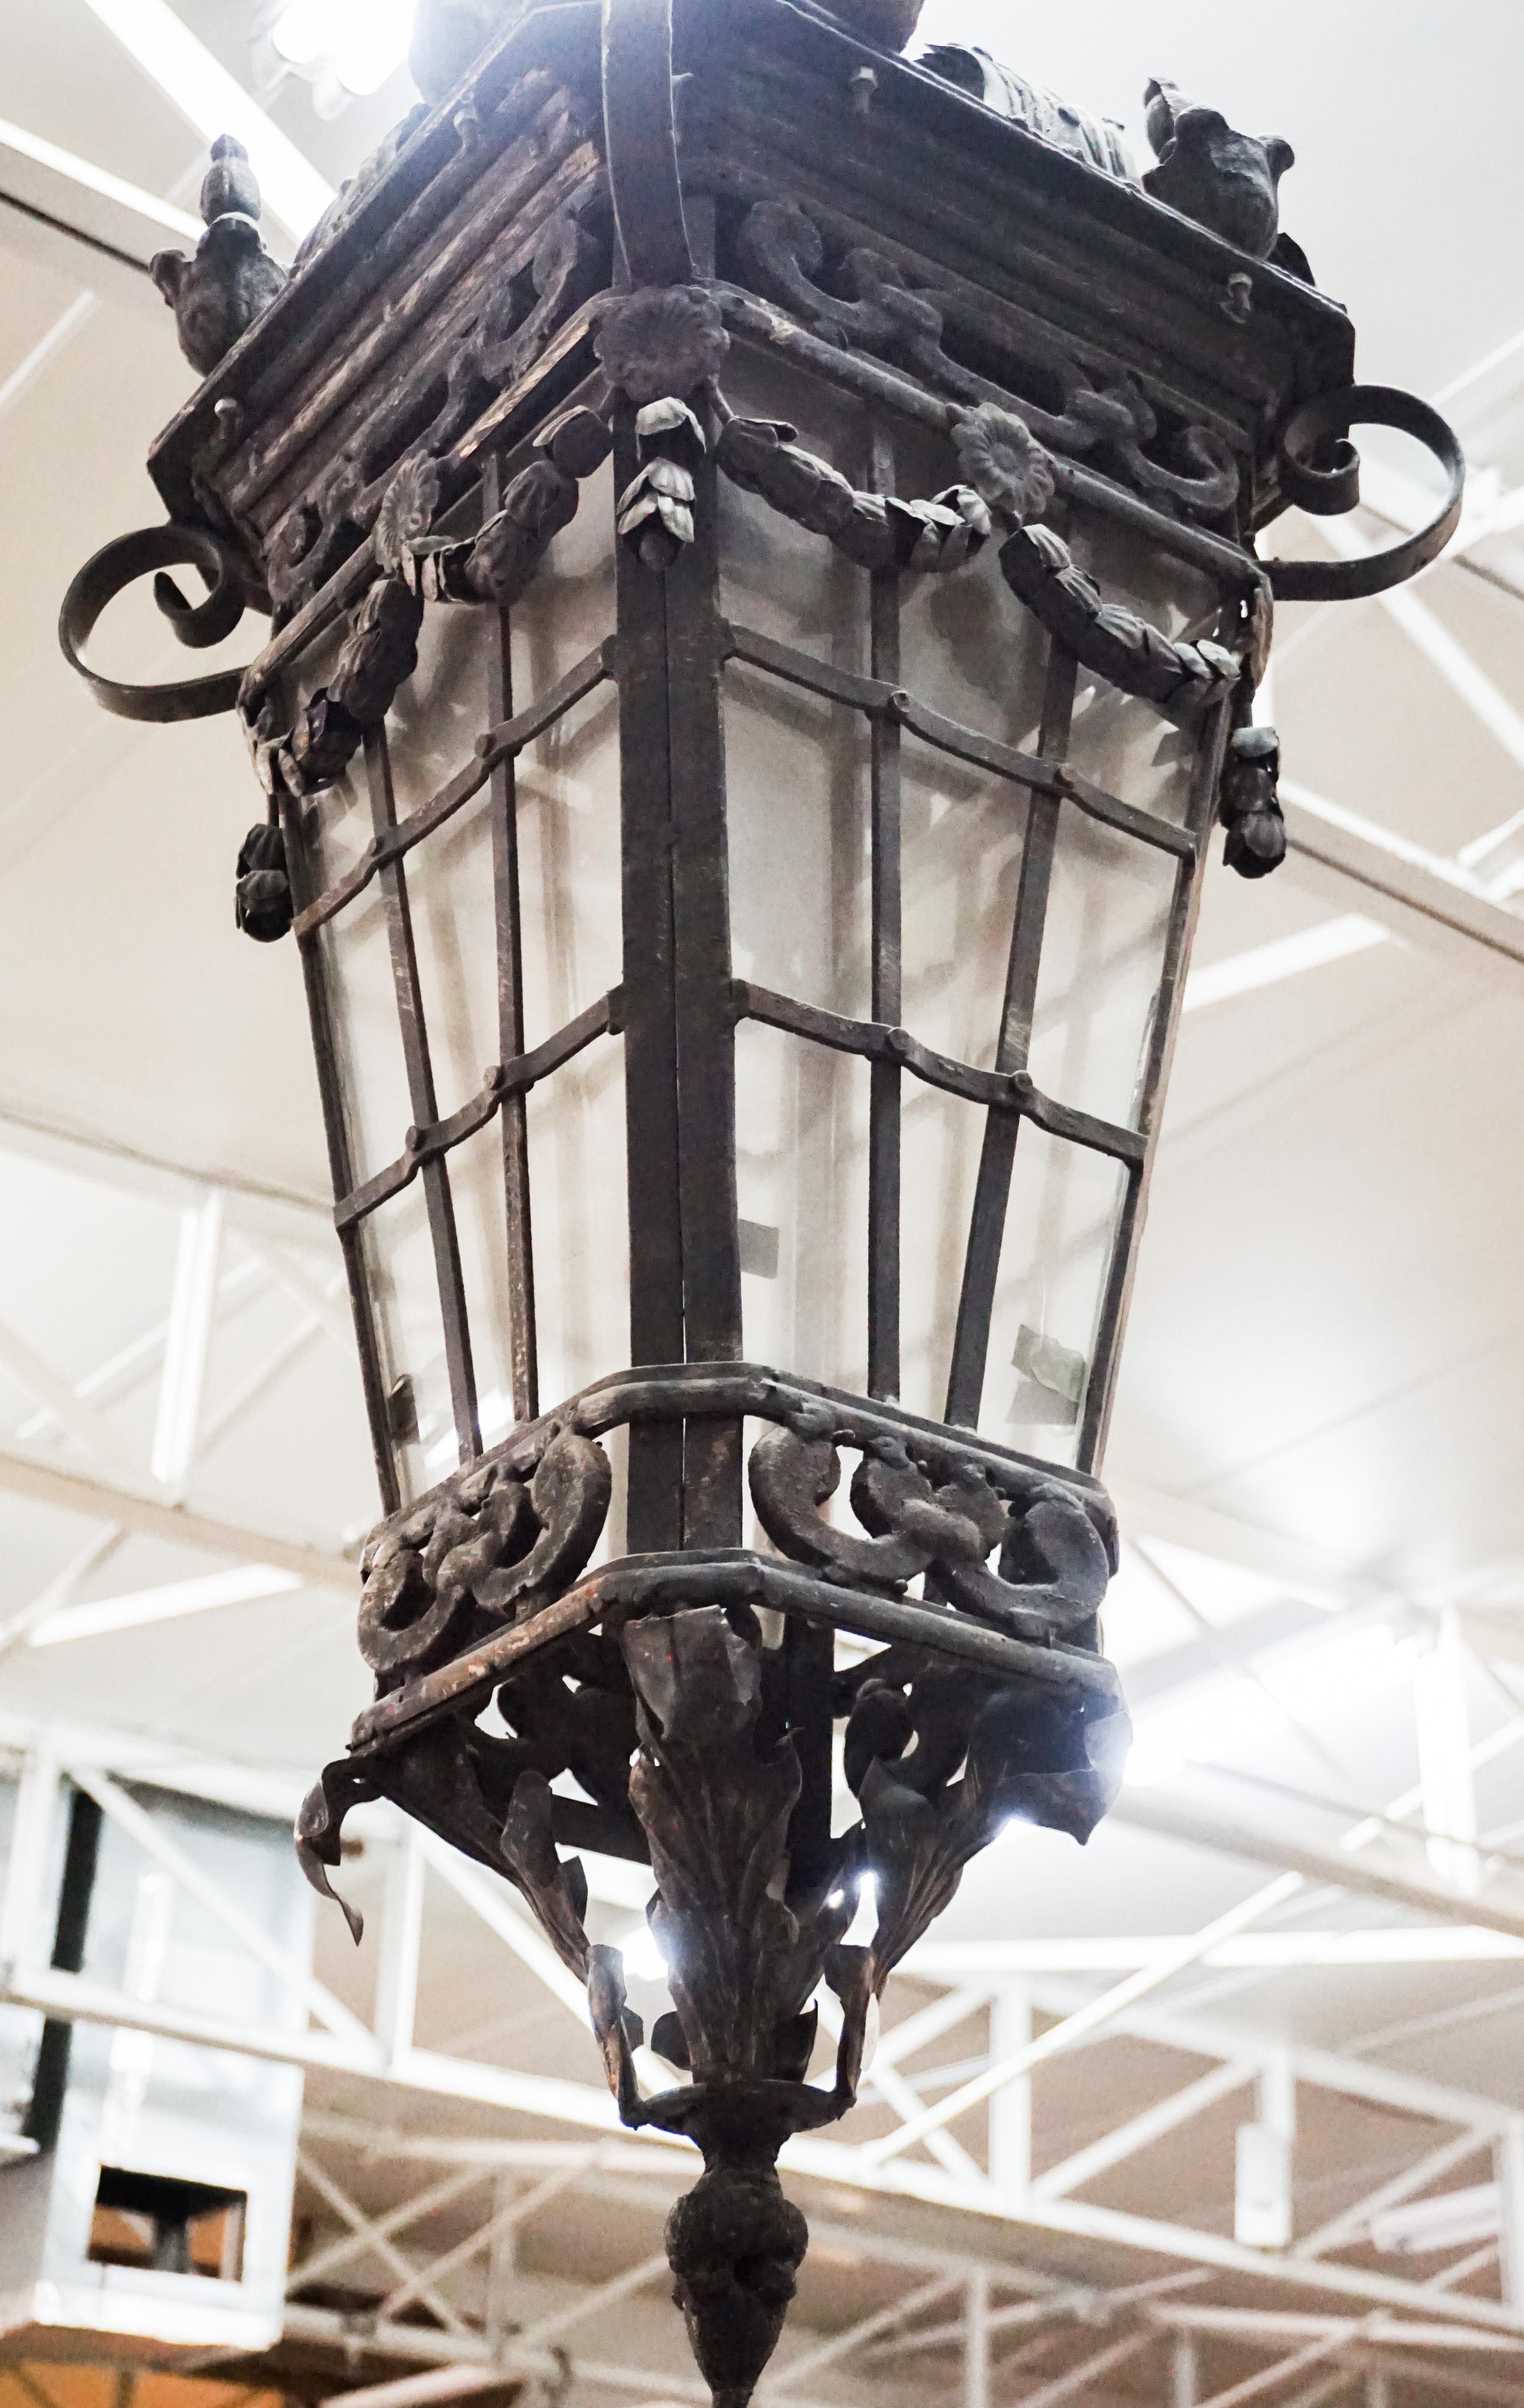 This hanging lantern is made of hand wrought iron and originates from France.

Measurements: 55